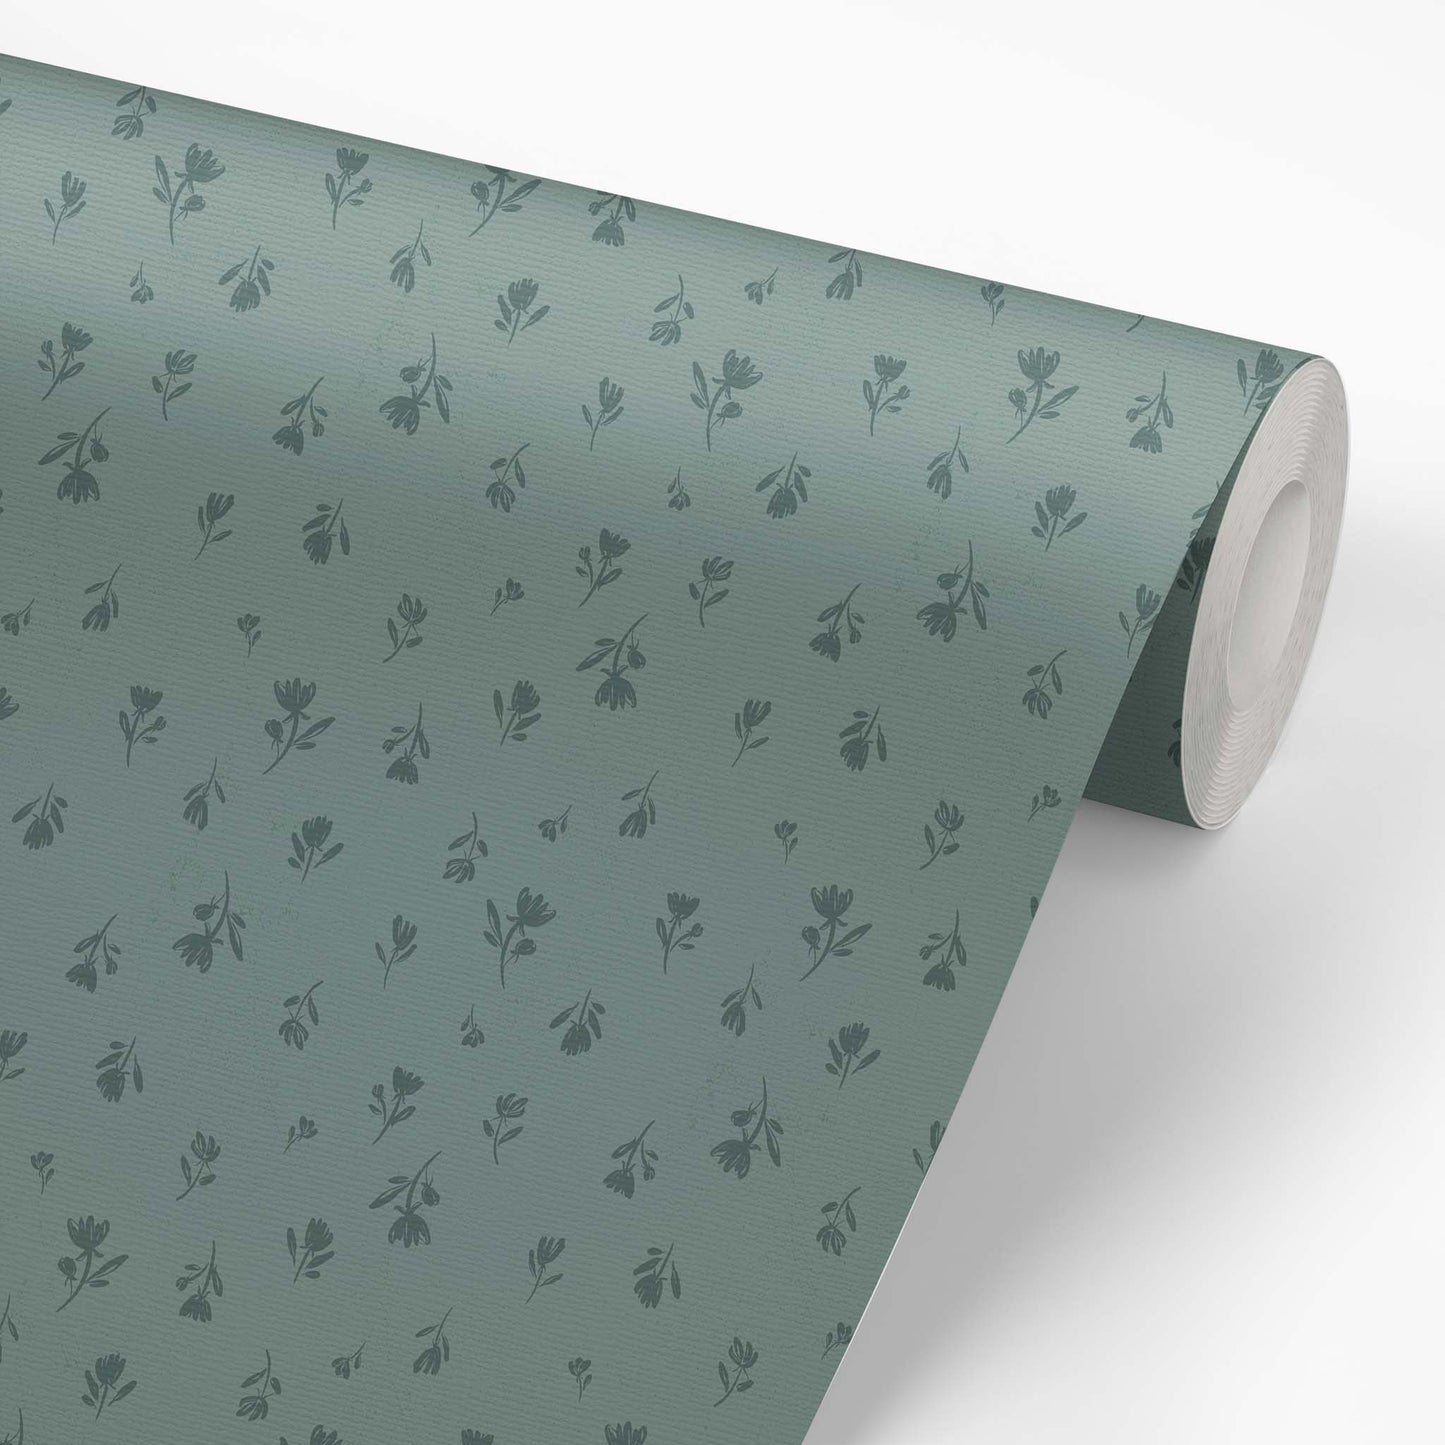 Wallpaper panel featuring Cayla Naylor Annette-Cyprus Peel and Stick Wallpaper - a floral pattern